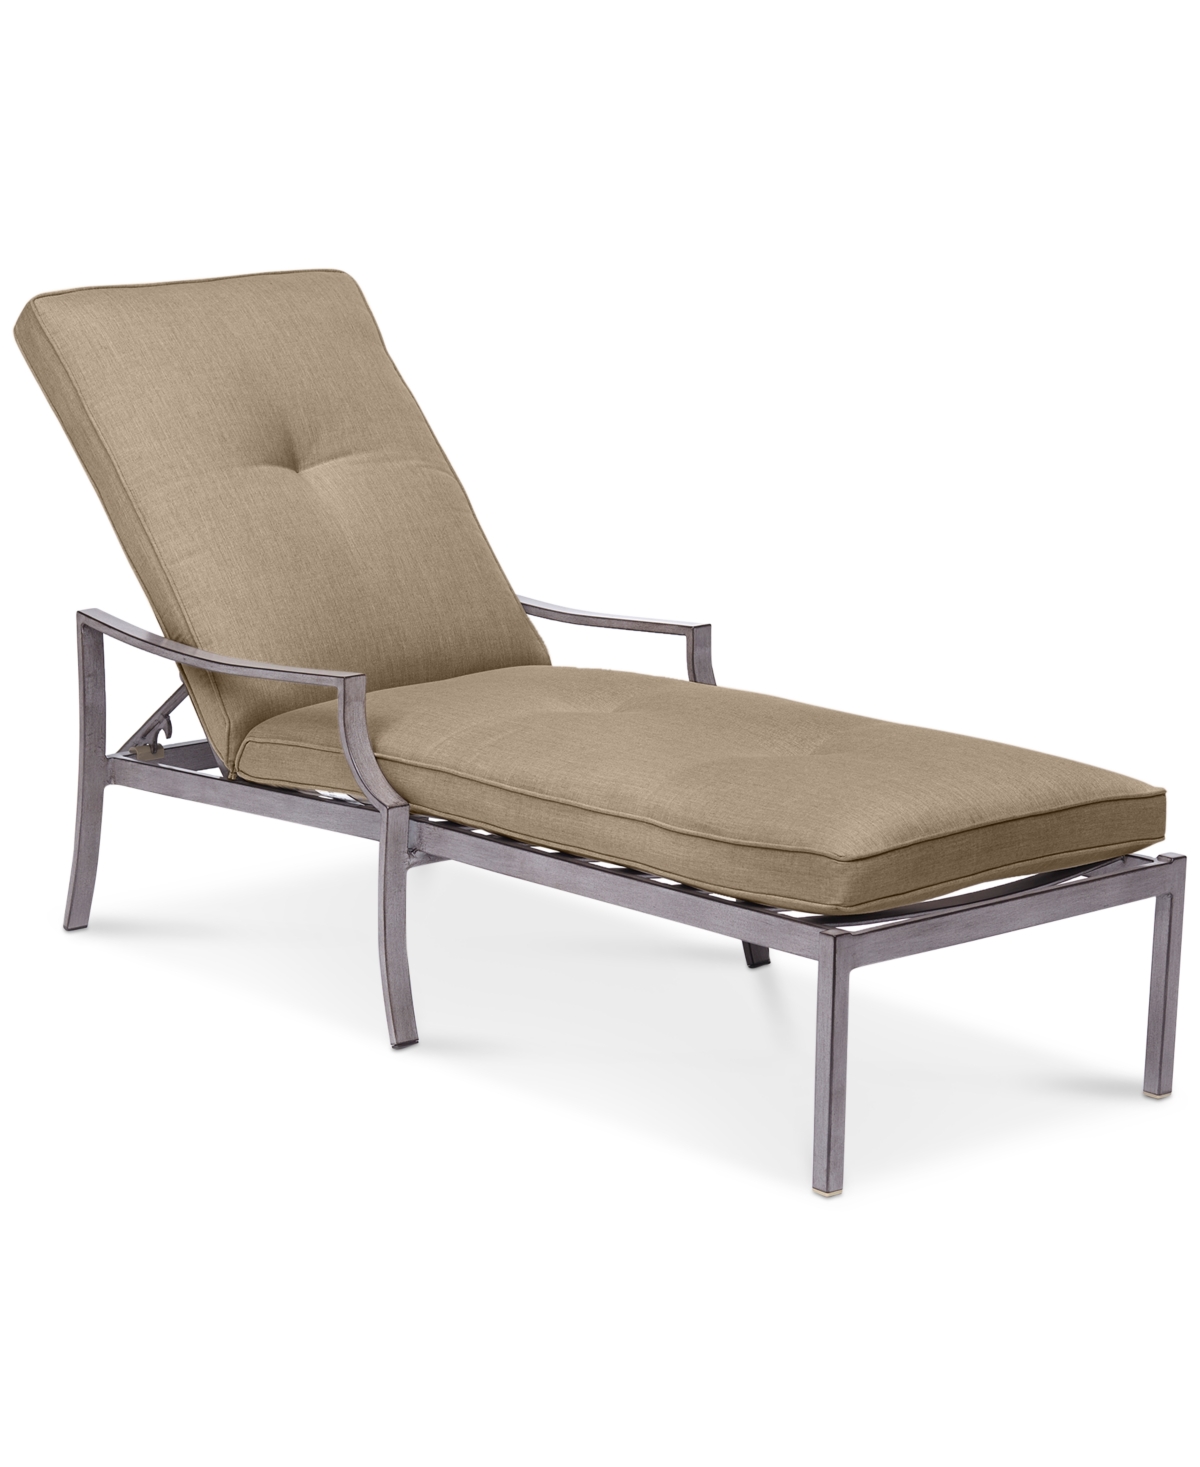 Shop Agio Wayland Outdoor Chaise Lounge, Created For Macy's In Outdura Remy Pebble